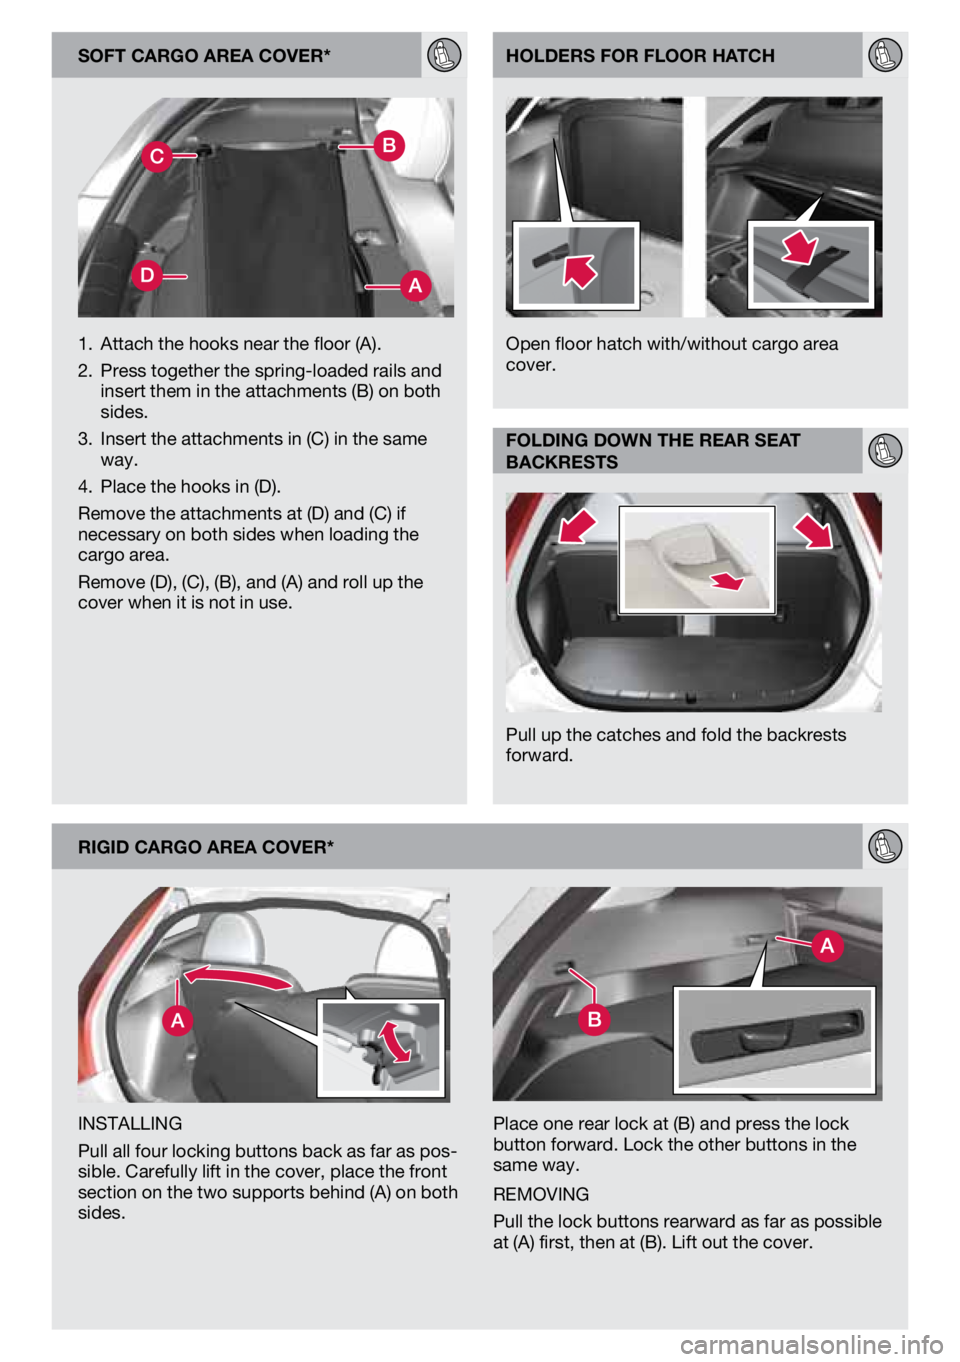 VOLVO C30 2013  Quick Guide soFt cargo area cover*
rIgId cargo area cover*
iNsTalliNg
Pull all four locking buttons back as far as pos-
sible. Carefully lift in the cover, place the front 
section on the two supports behind (a) 